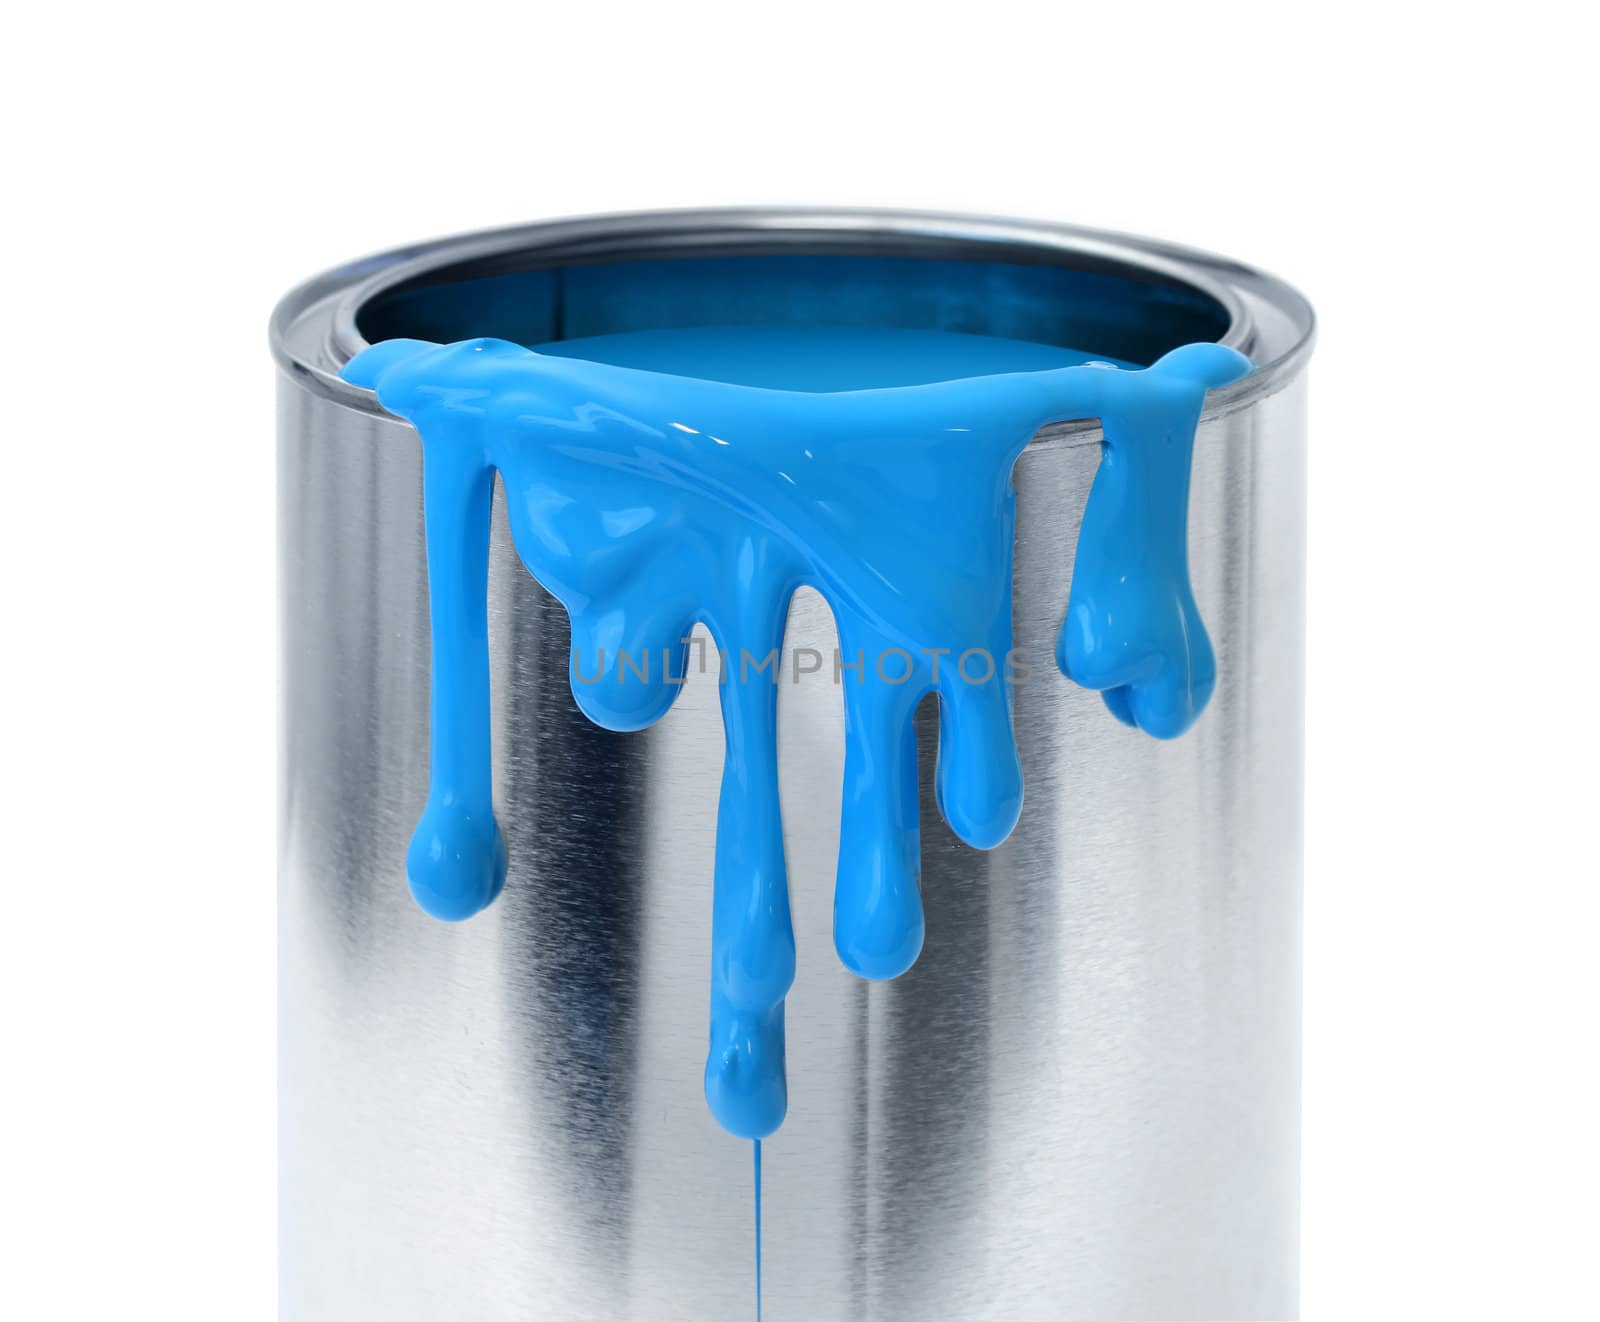 Thick blue paint dripping tin can container on white background